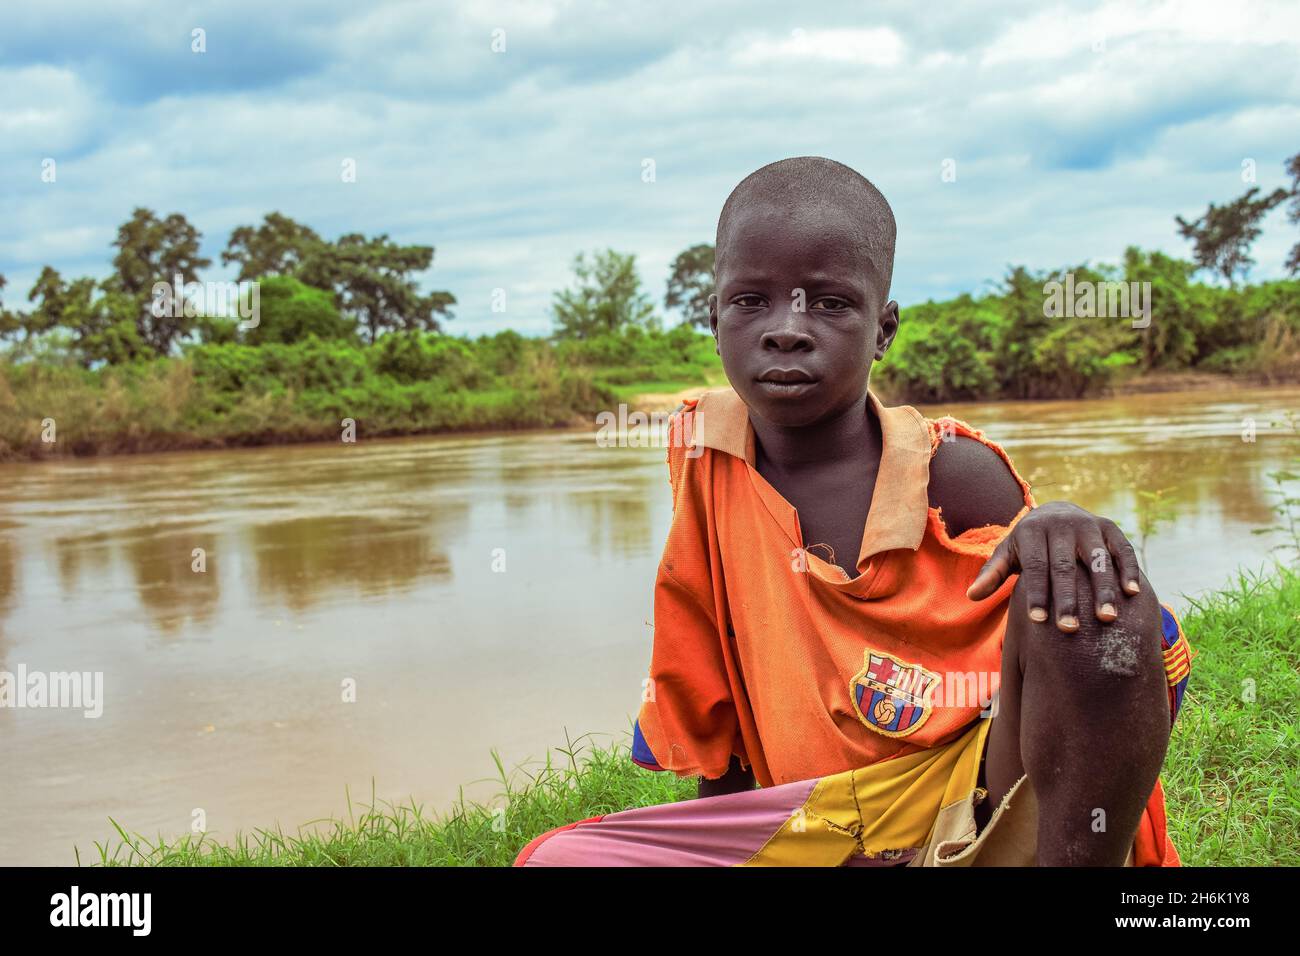 African Child Sitting on a Hill Across a River in a Rural Community. Poor Water Hygiene in Rural Communities in Africa. Stock Photo